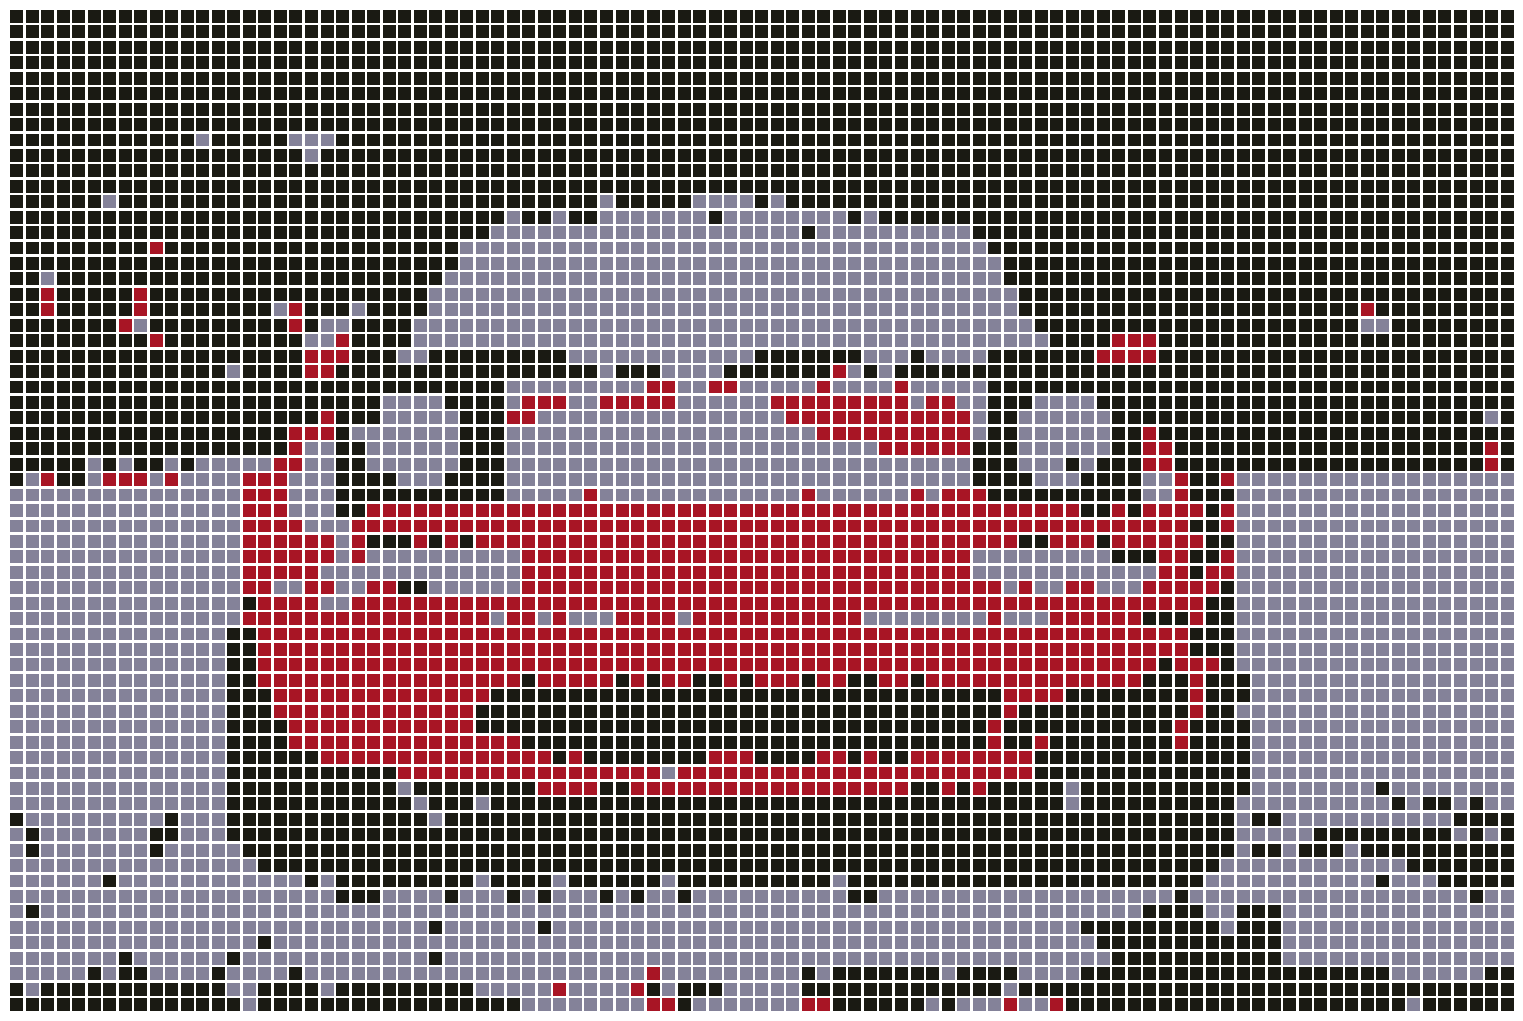 pixelated Miata with db clustering